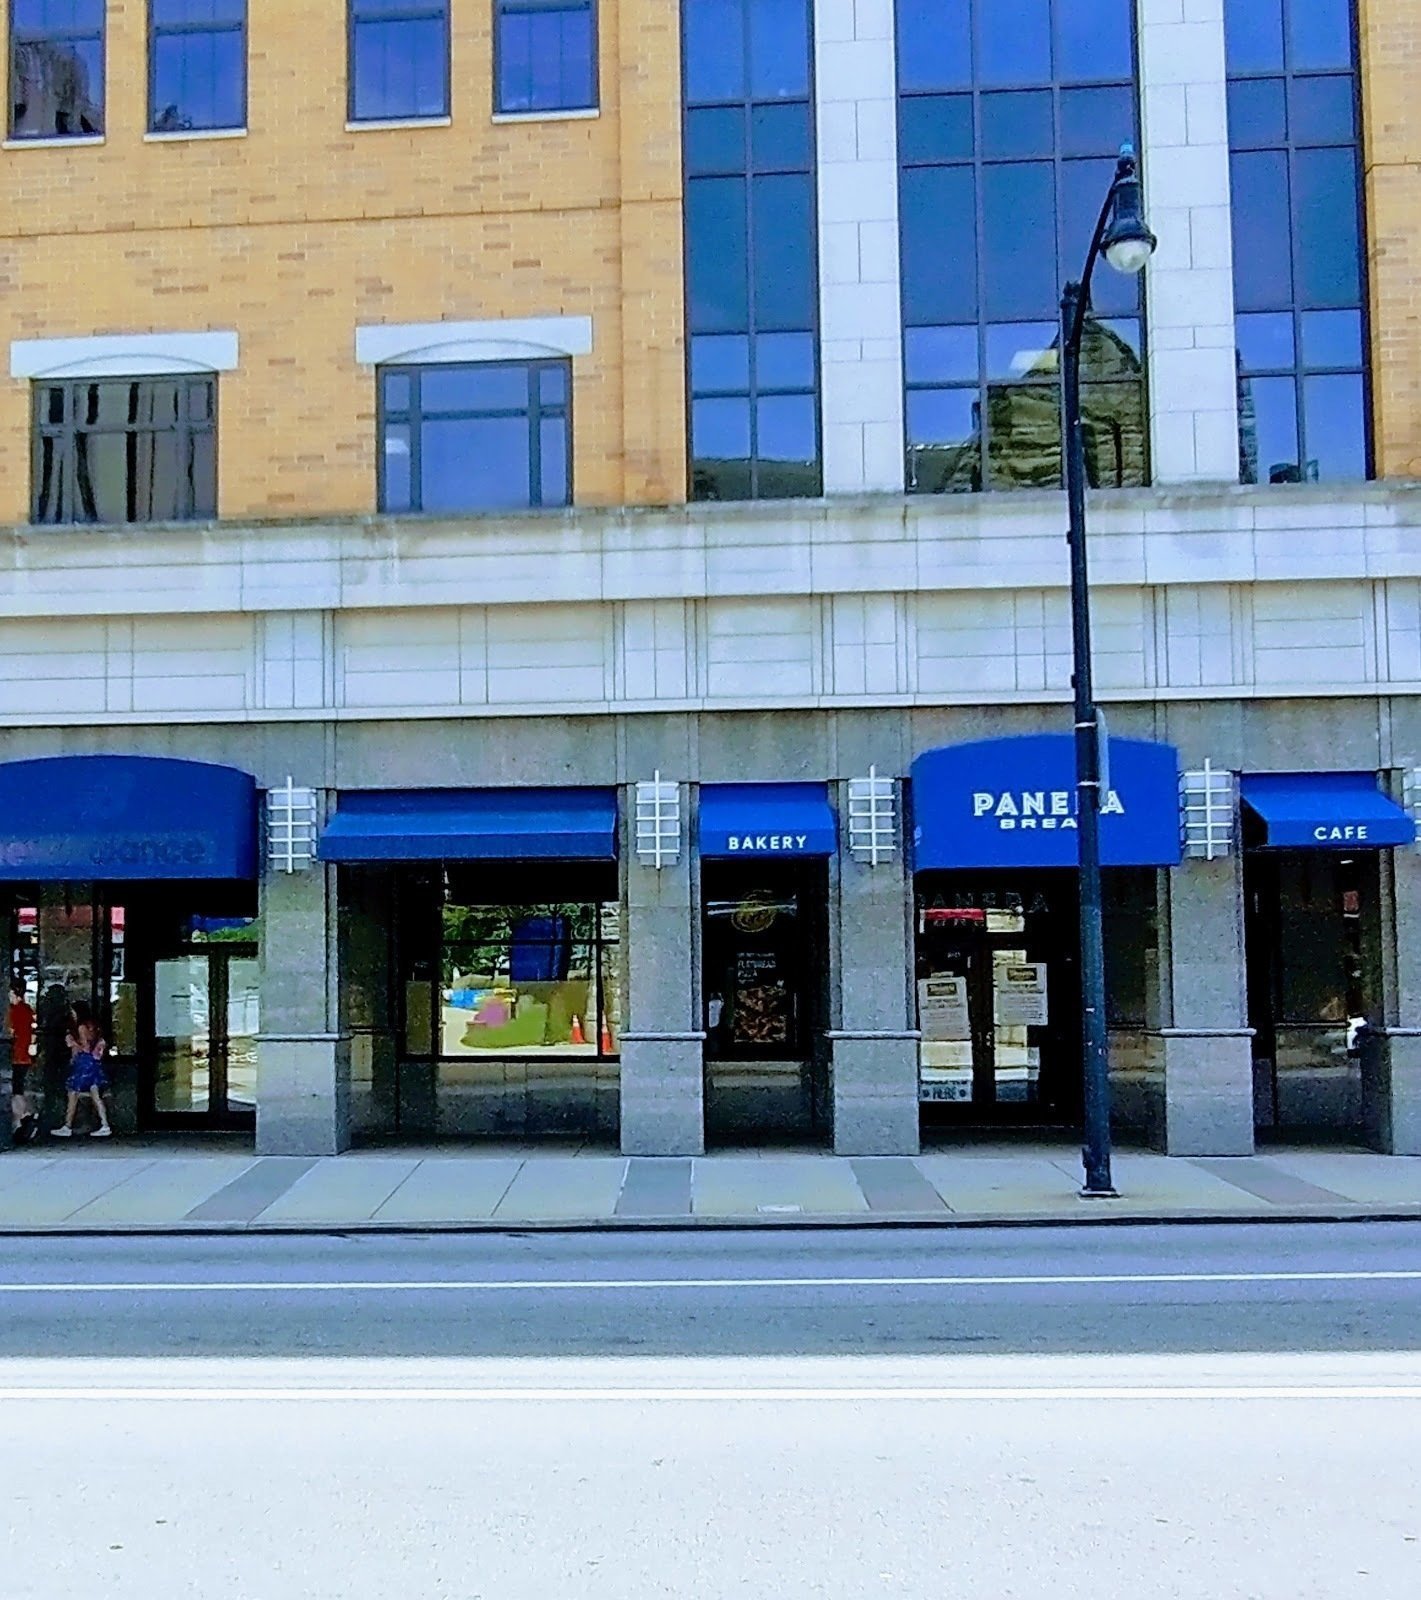 <span class="translation_missing" title="translation missing: en.meta.location_title, location_name: Panera Bread, city: Pittsburgh">Location Title</span>